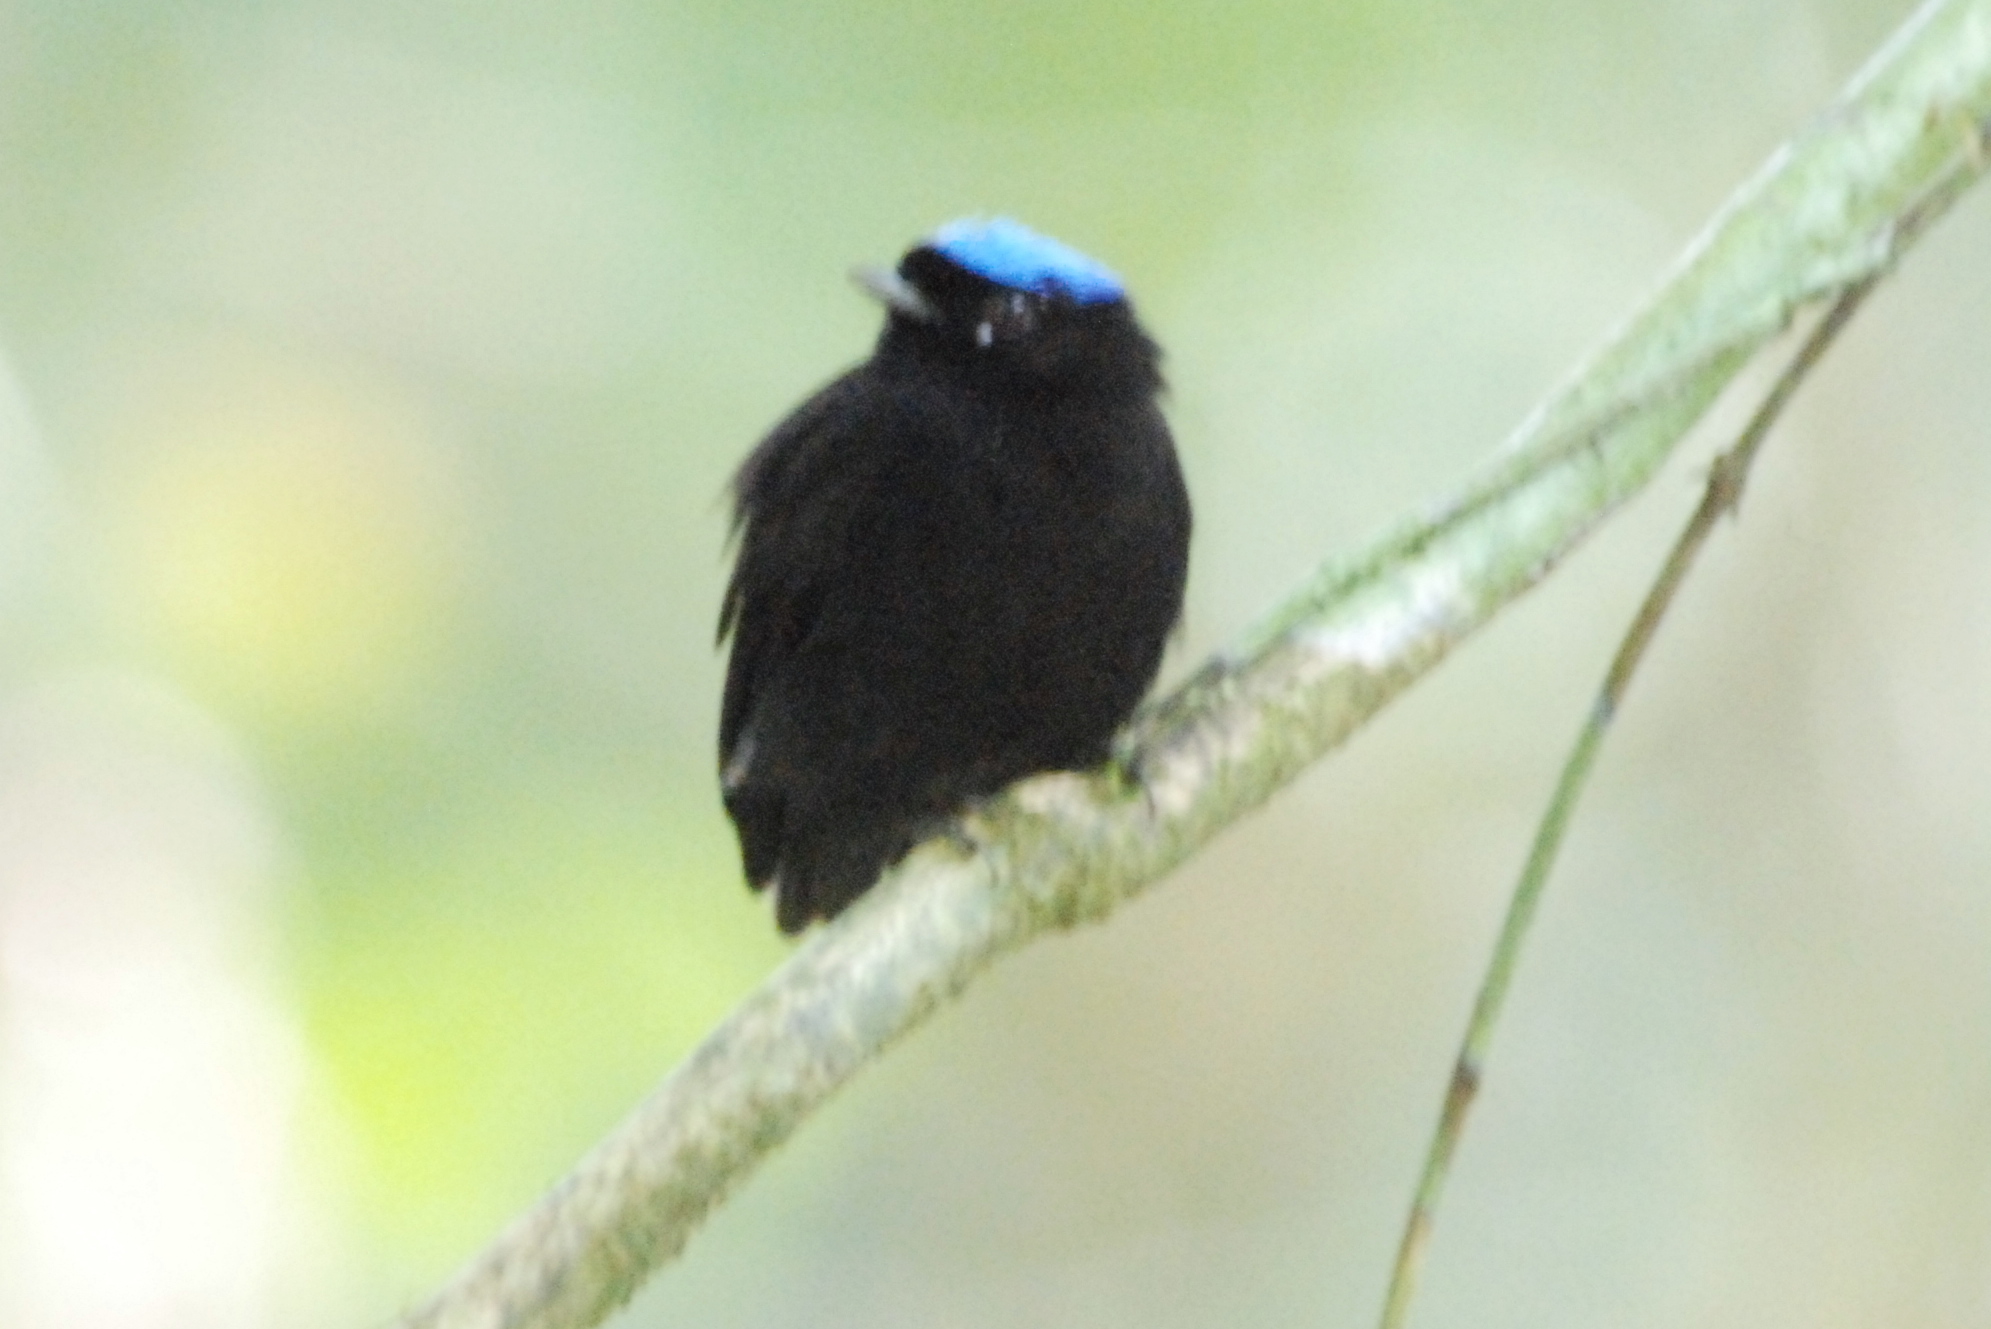 Click picture to see more Blue-crowned Manakins.